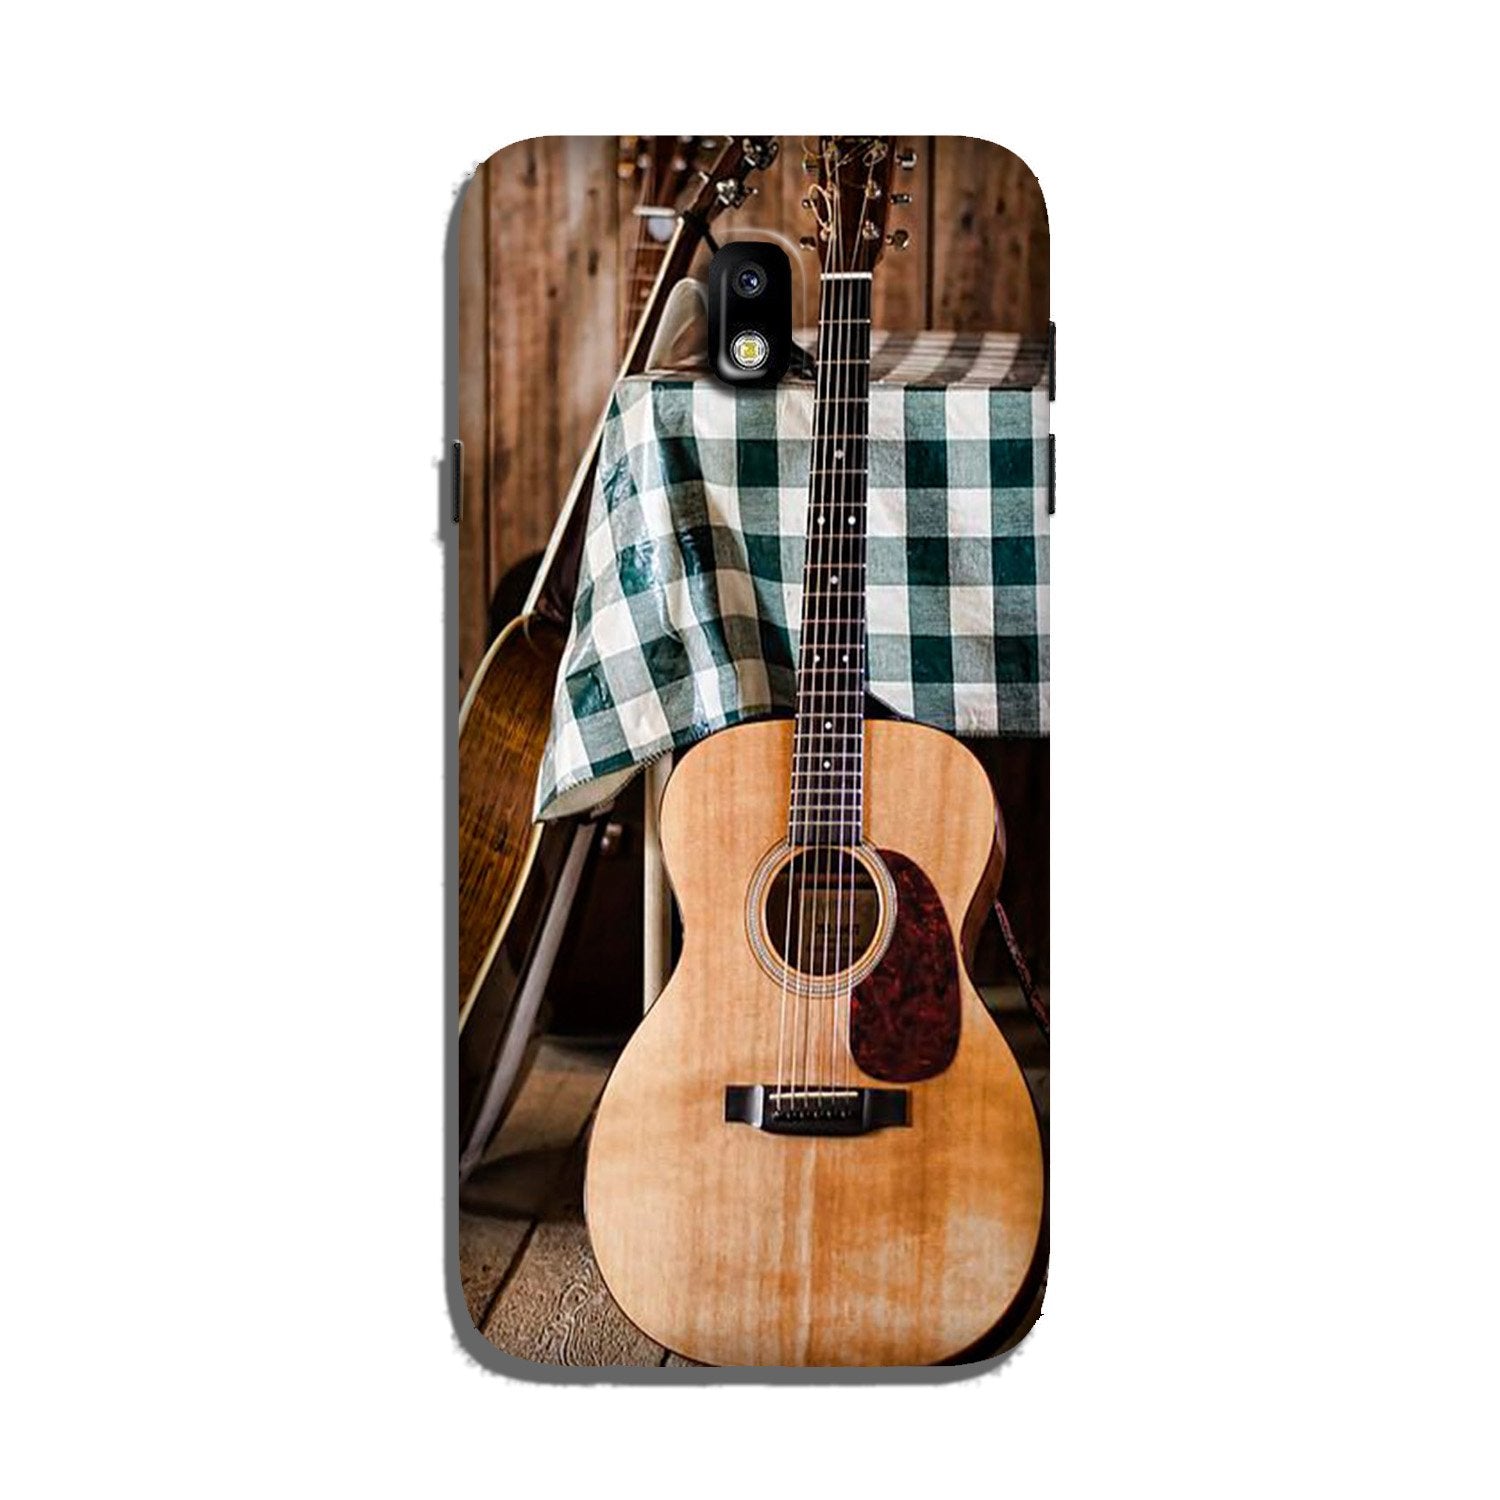 Guitar2 Case for Galaxy J3 Pro